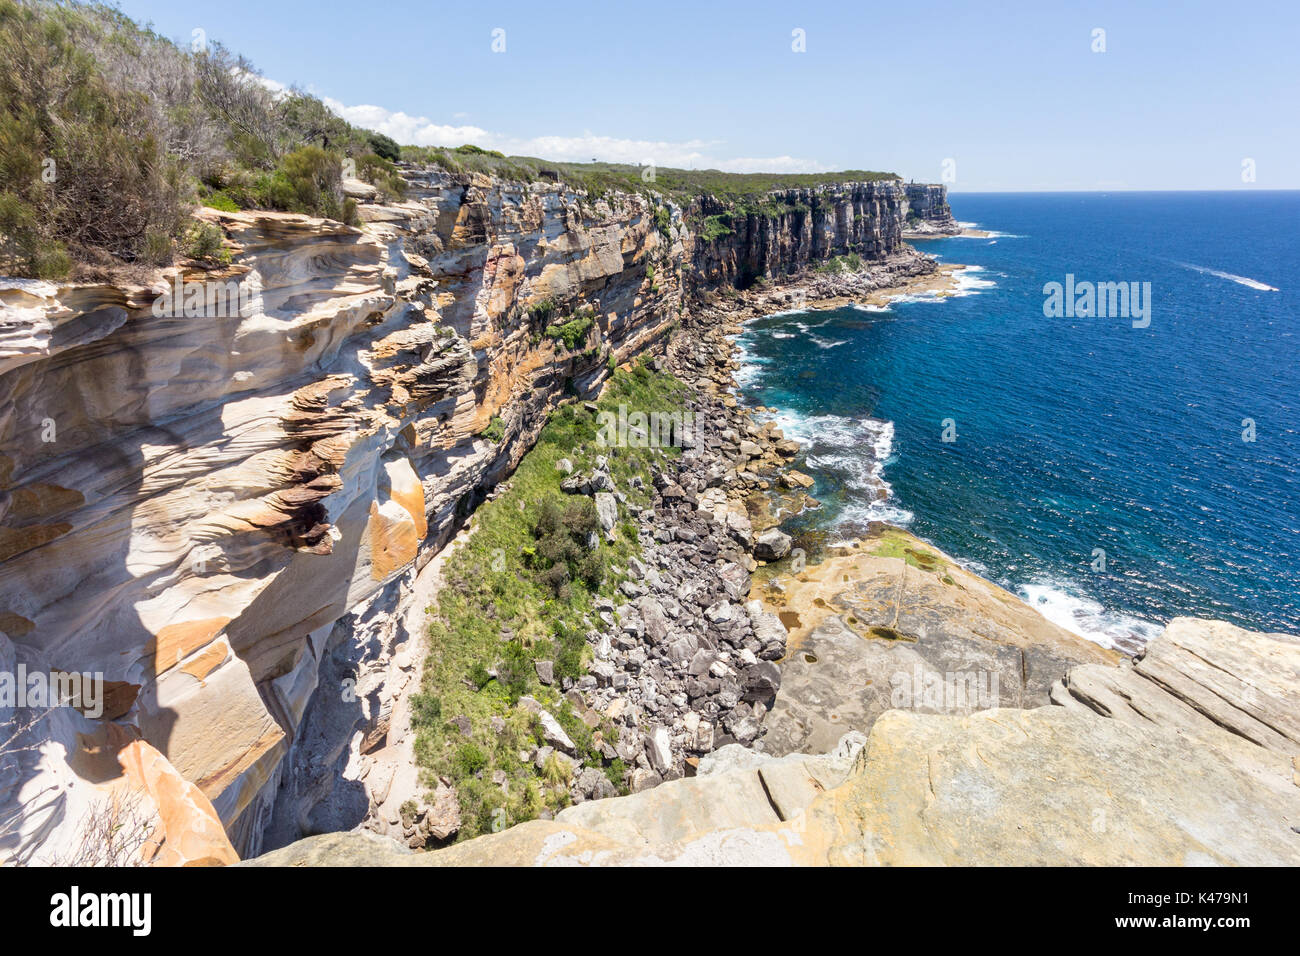 Rugged coastline, North Point, Manly, Sydney Harbour, New South Wales, NSW, Australia Stock Photo